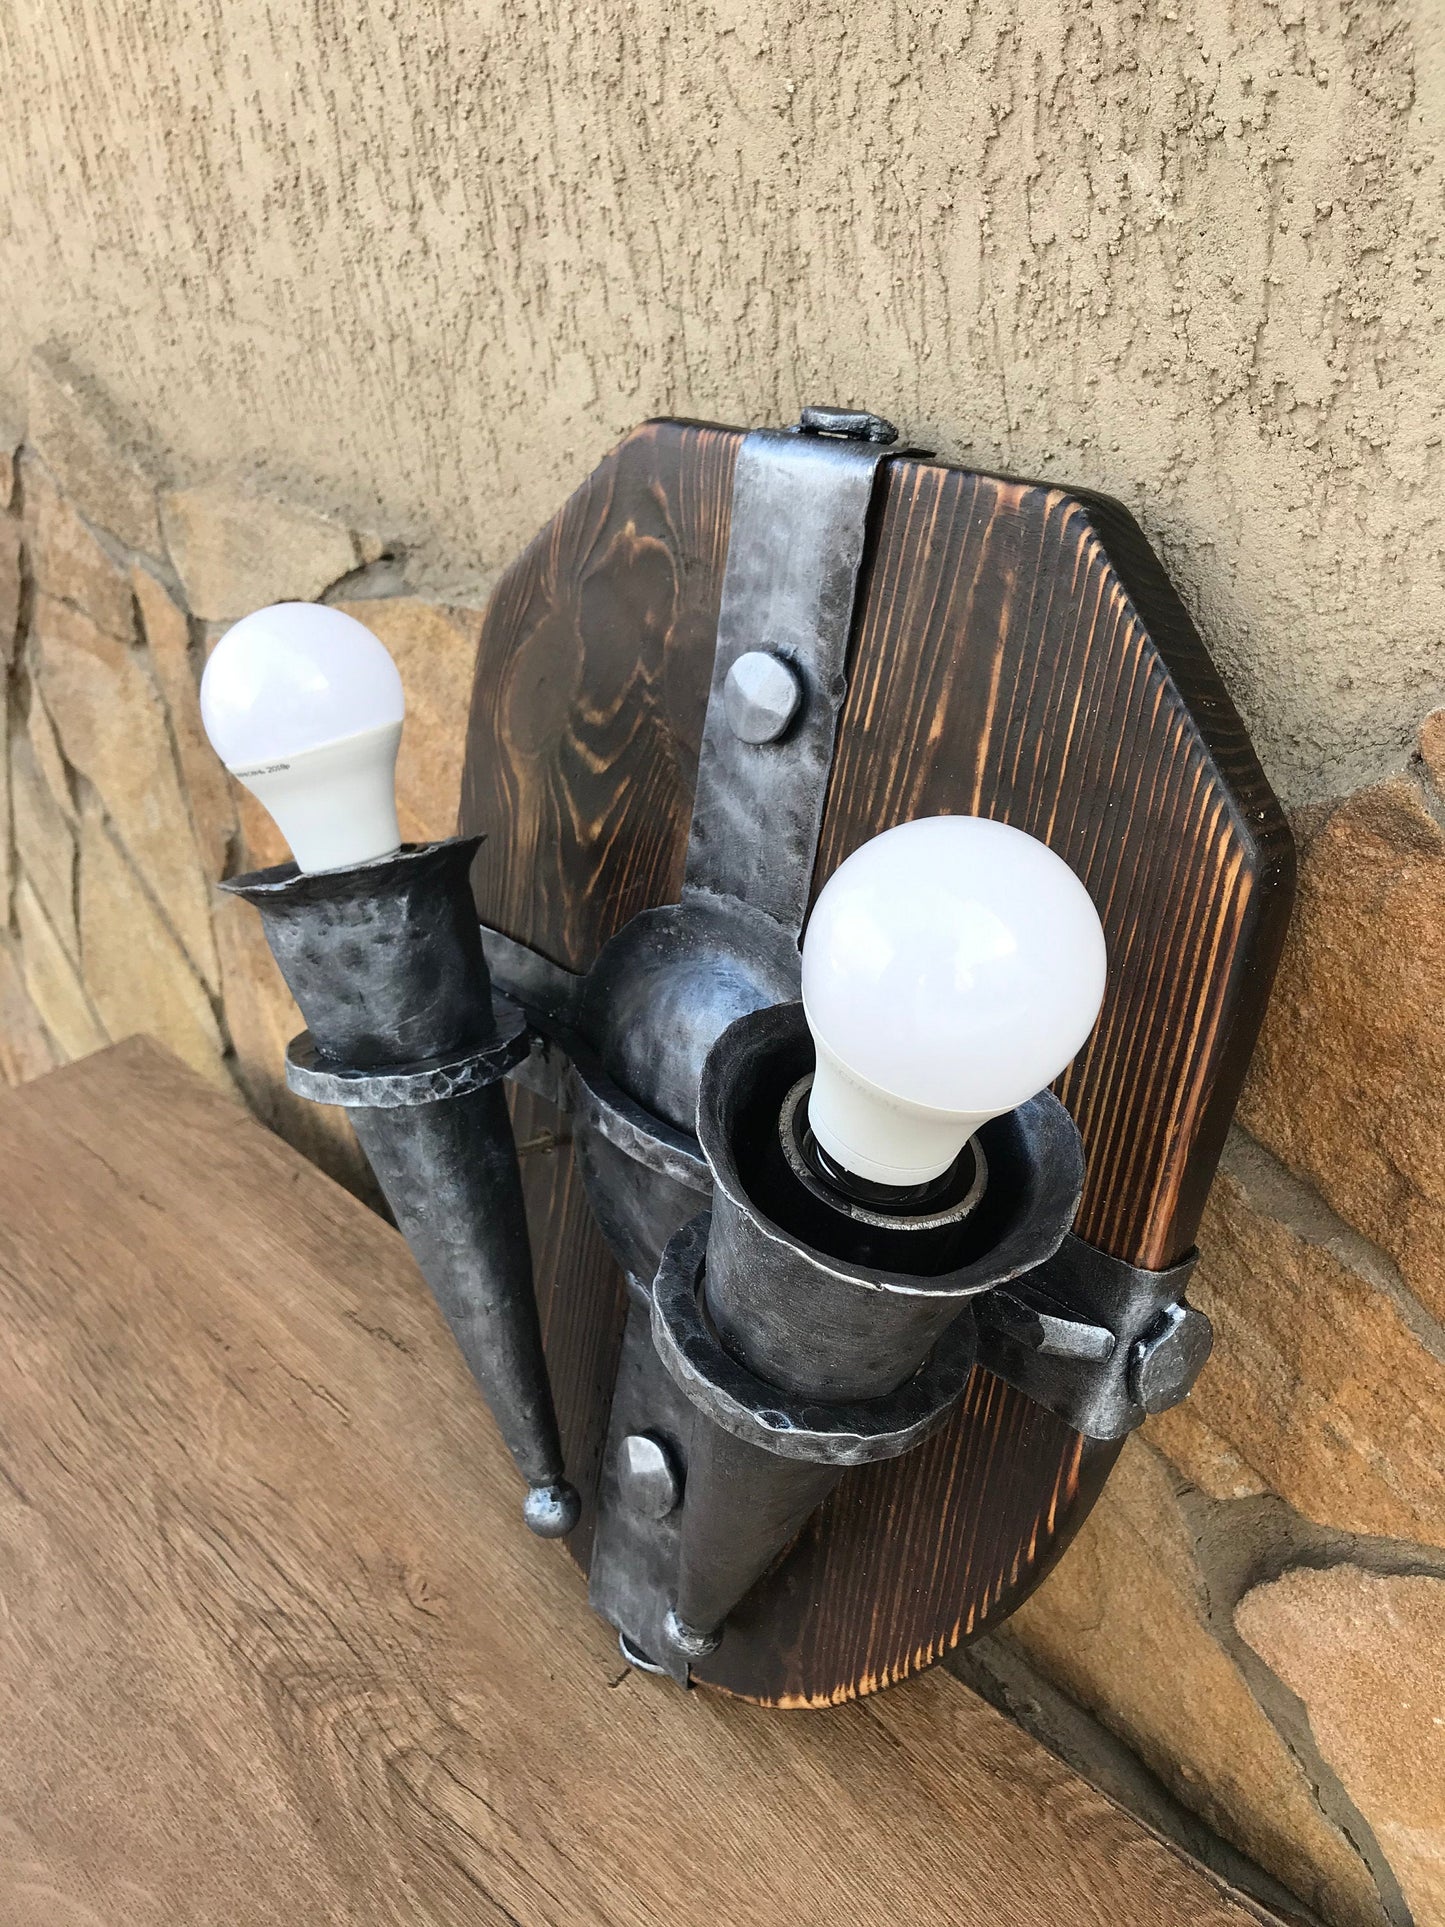 Wall sconce, medieval, midcentury, prehistoric, cave, castle, viking, rustic, porch lantern, shield, medieval gift, cave wall art, torch